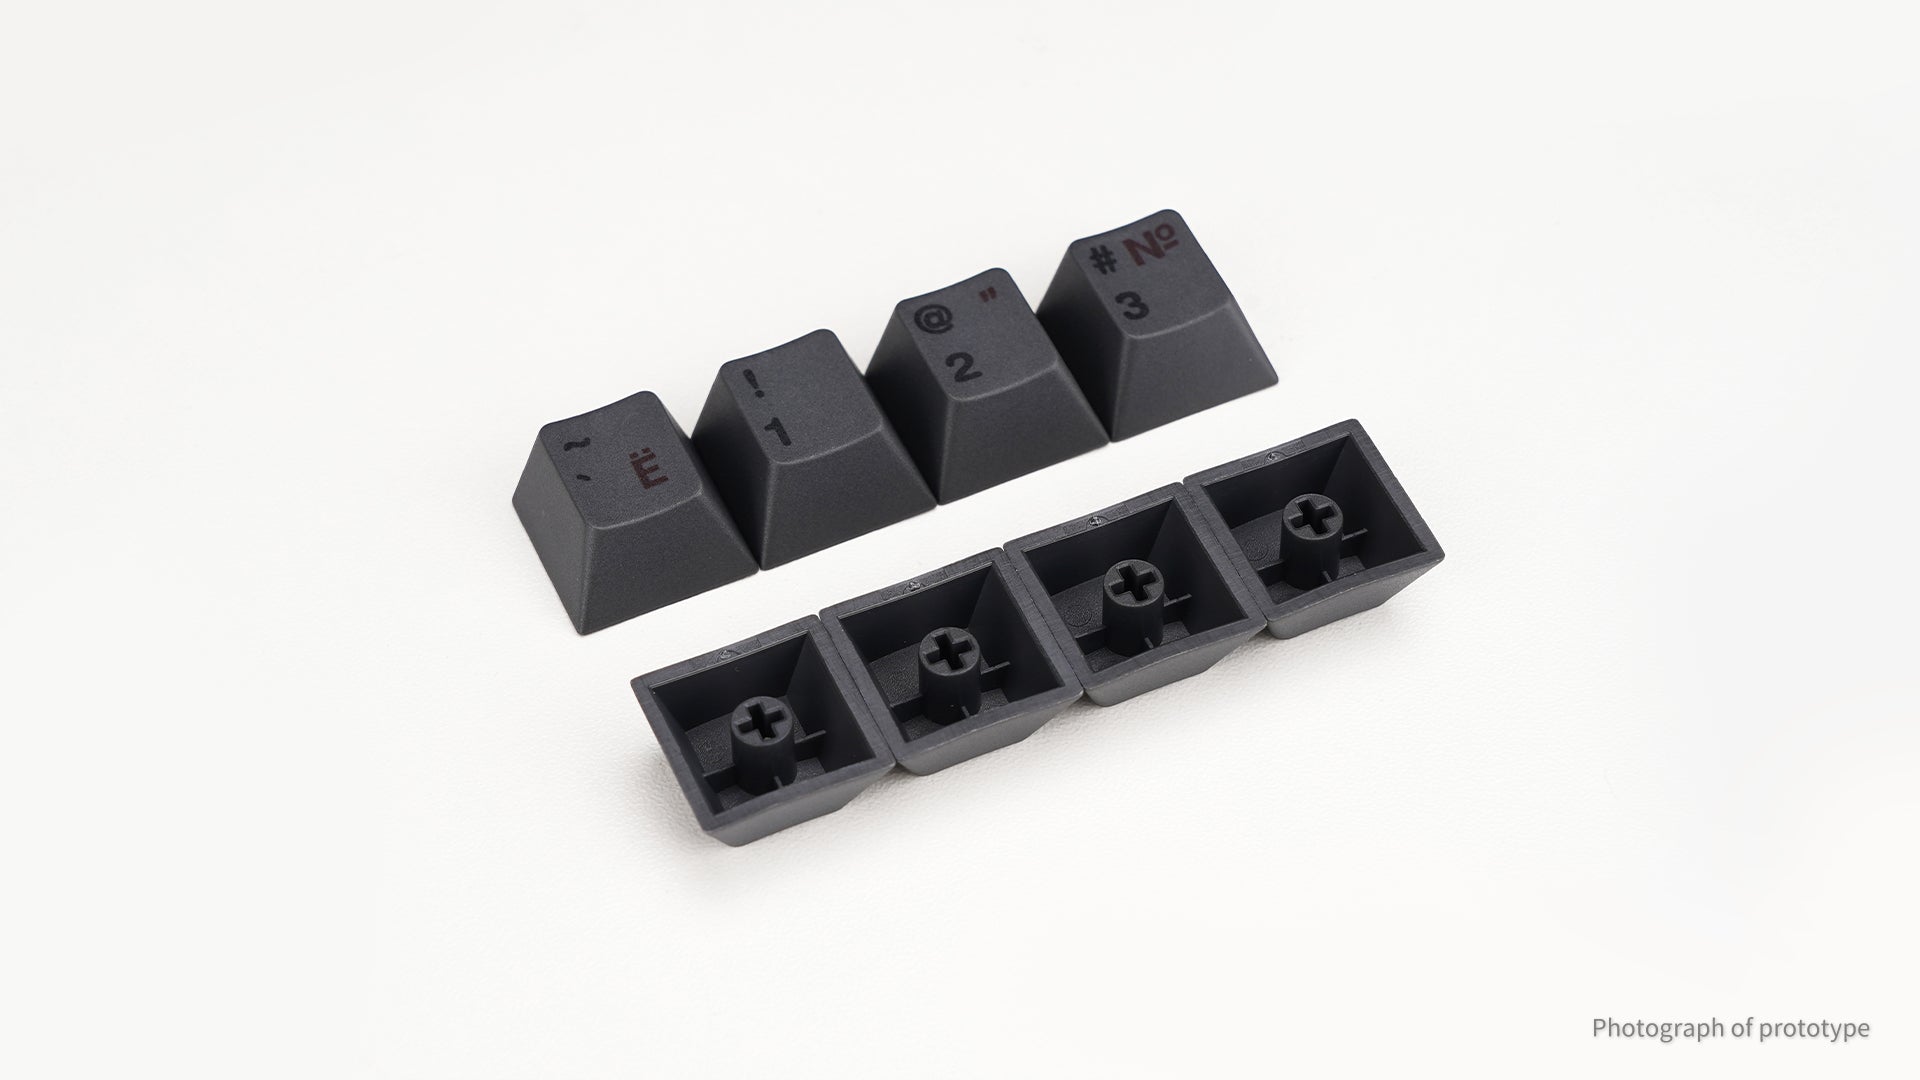 [In-Stock] WS Cthulhu Keycap-Shipped from US Warehouse